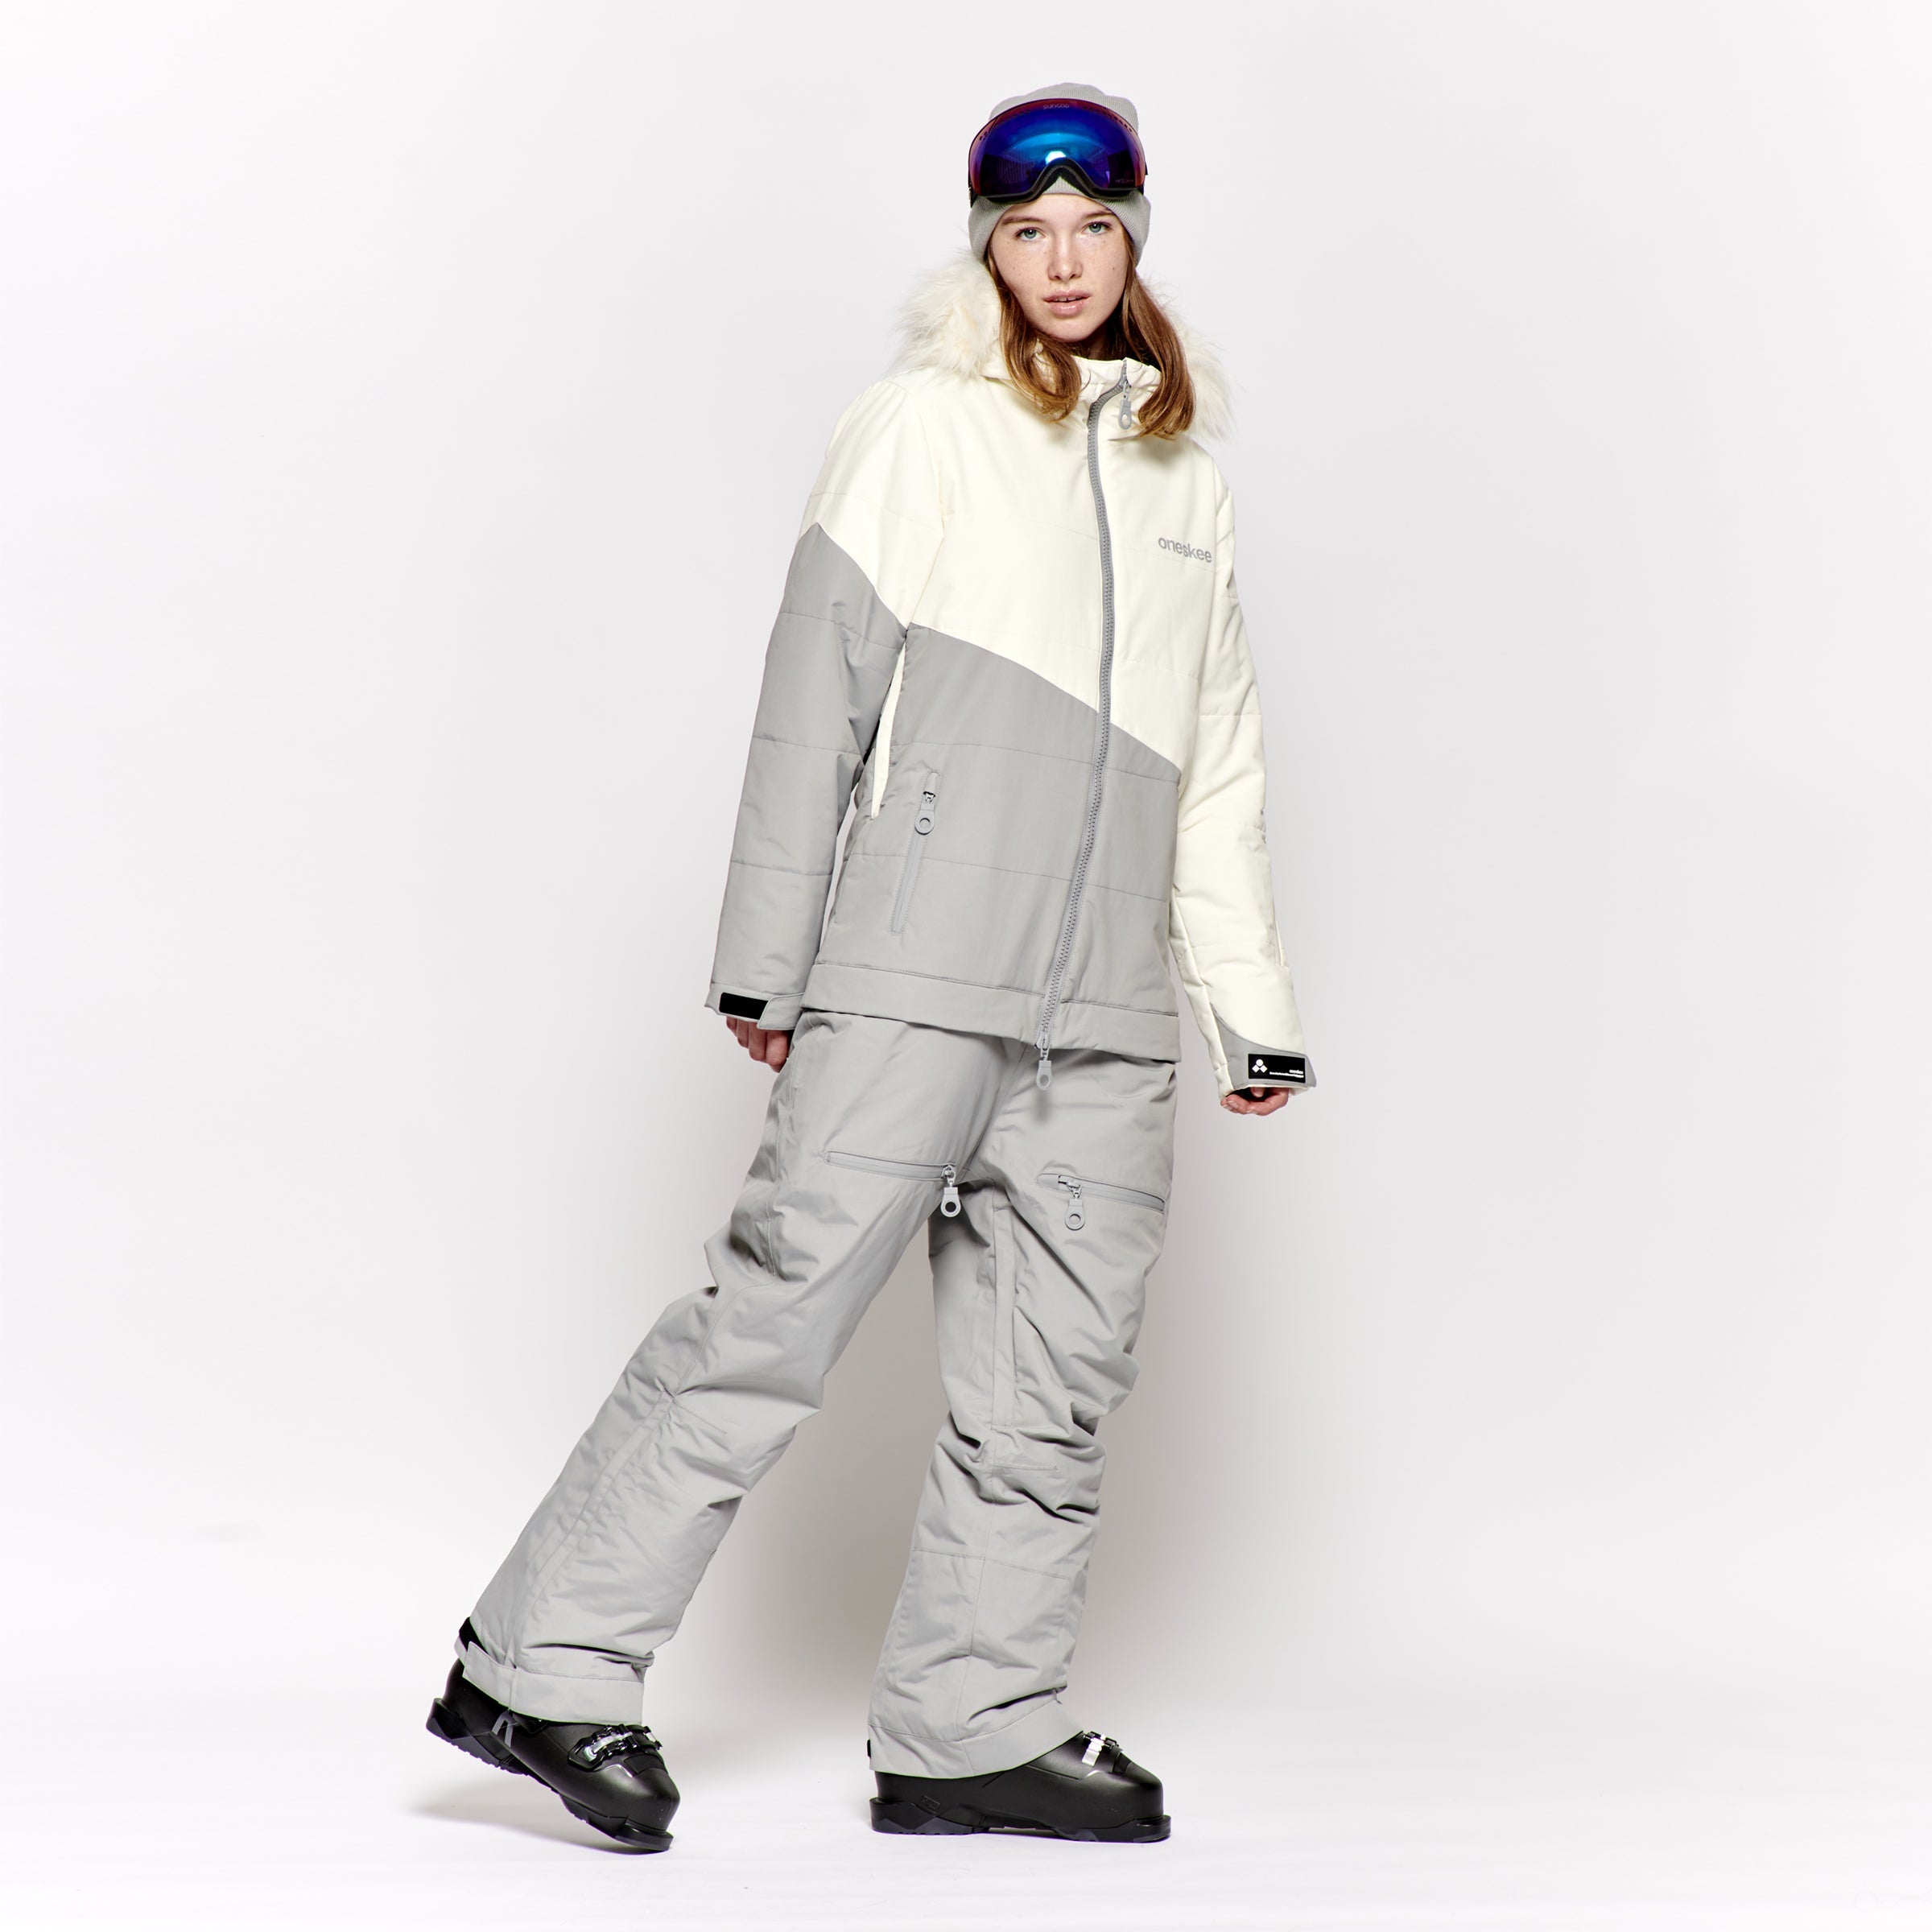 Women's Ski Suits - Dare to be Different - oneskee-ltd-us